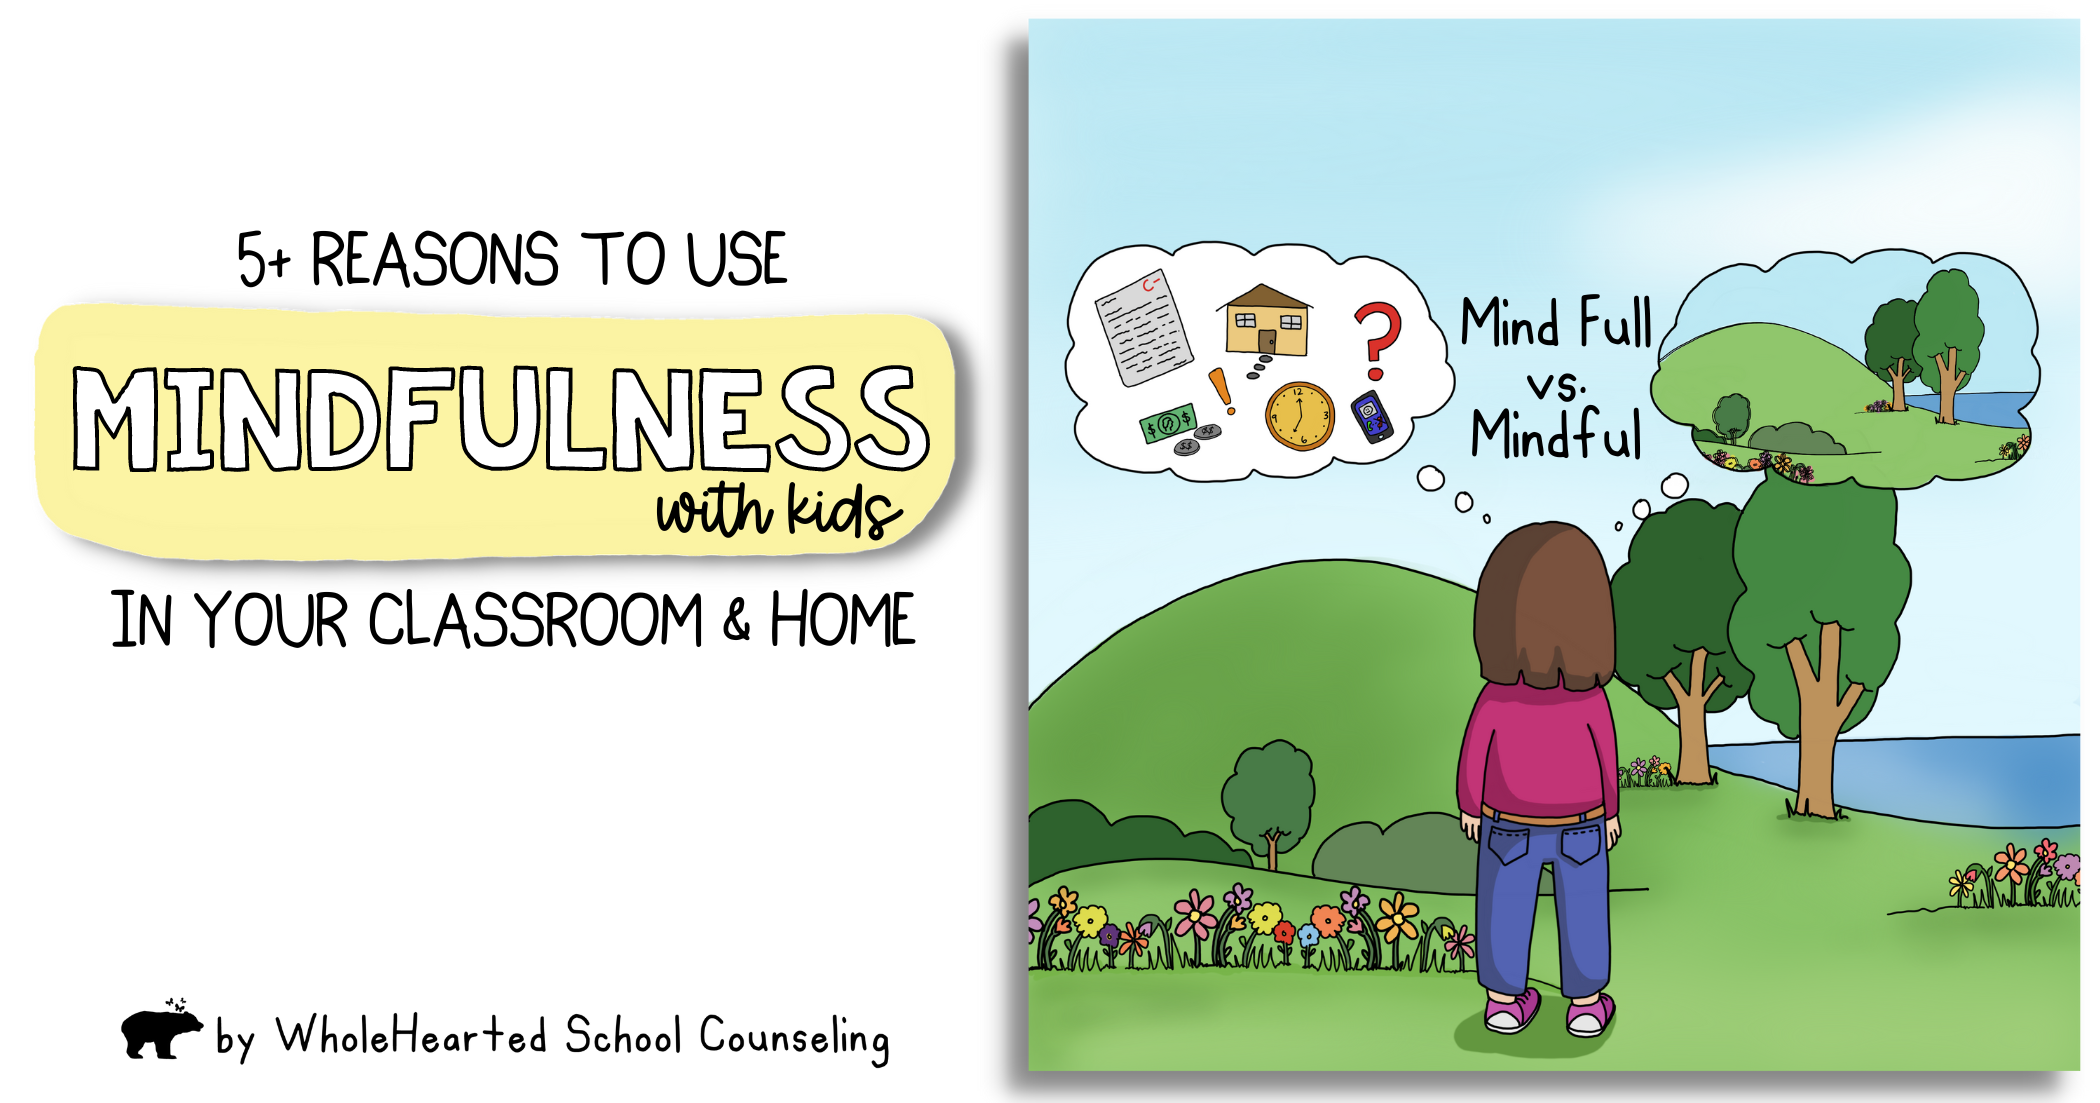 5 Reasons to Use Mindfulness in the Classroom and Home with Kids illustration depicting difference between Mind Full and Mindful